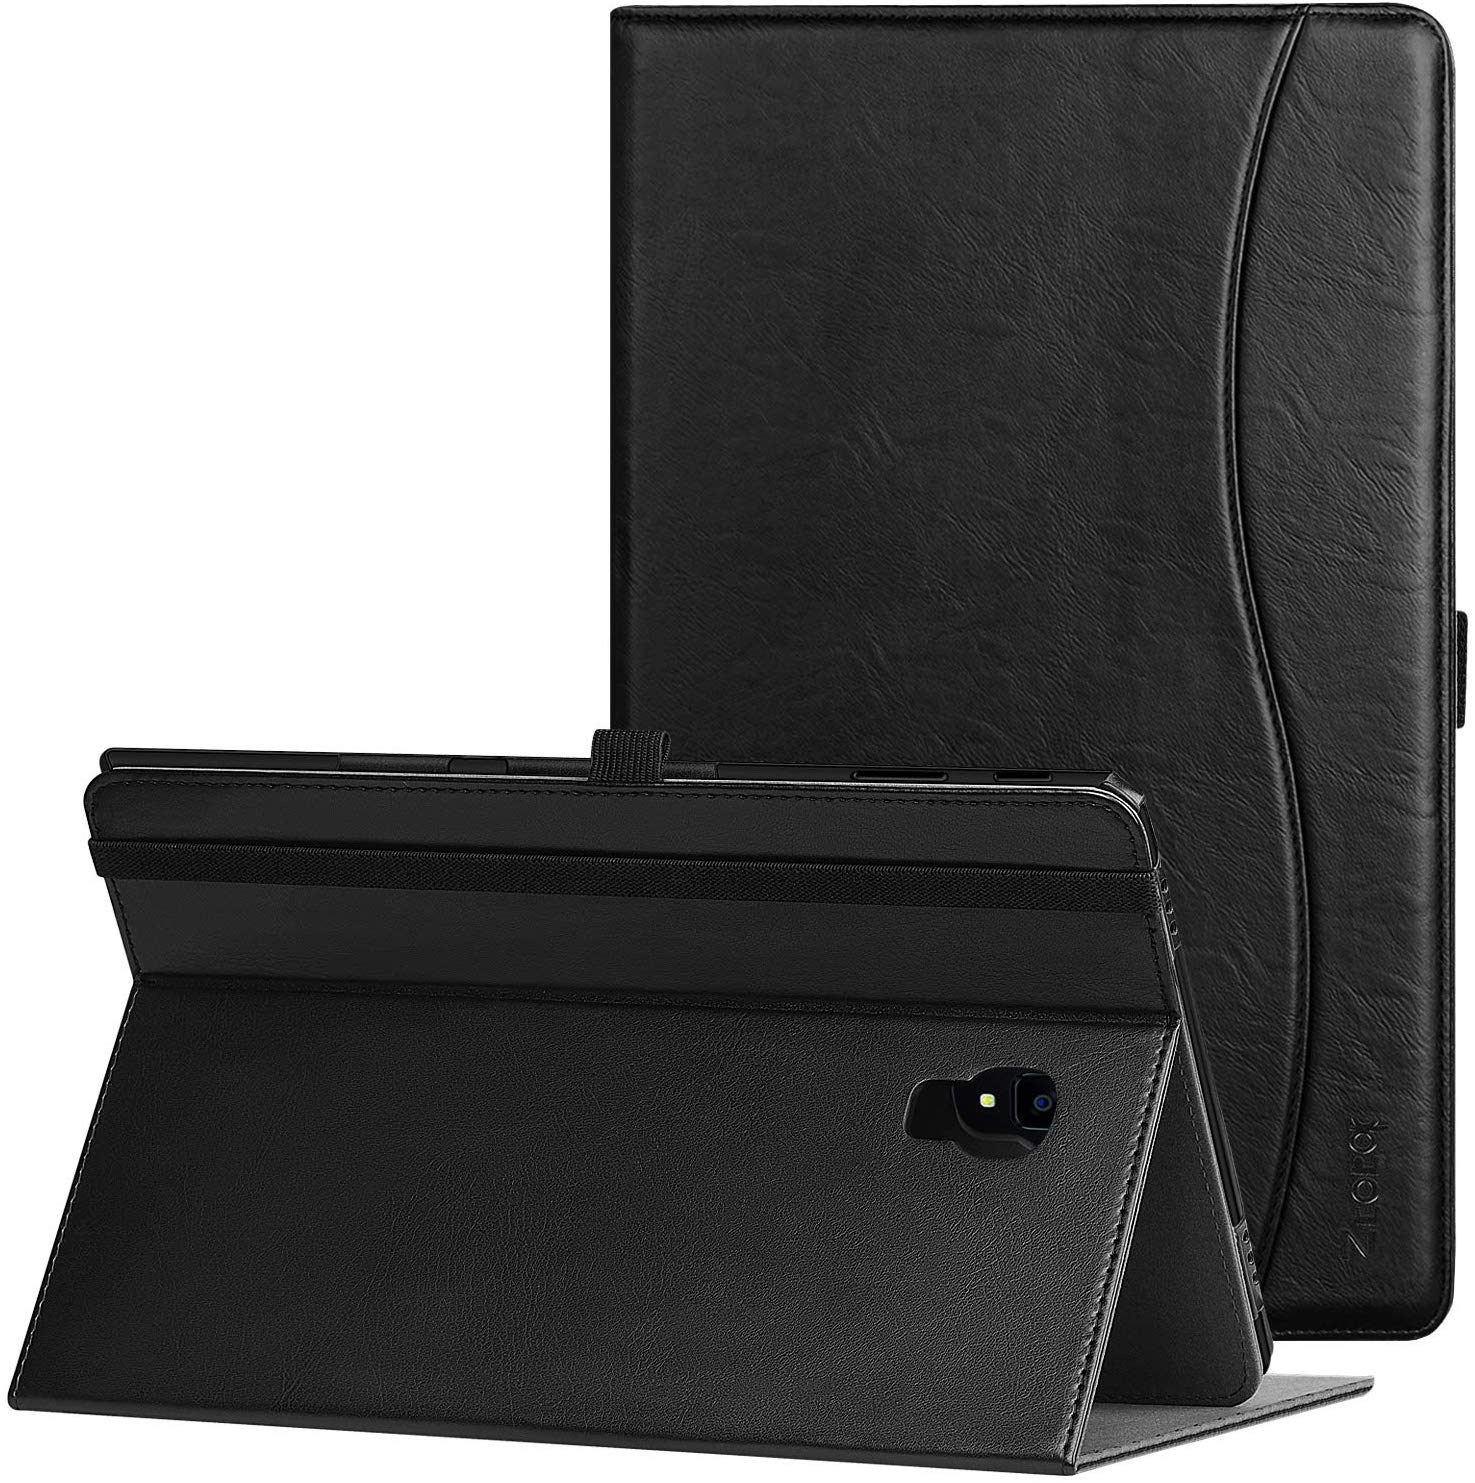 Case for Samsung Galaxy Tab A 10.5 Inch 2018(SM-T590/T595/T597), Leather Folding Stand Cover with Auto Wake/Sleep, Pencil Holder and Multiple Viewing Angles,Black